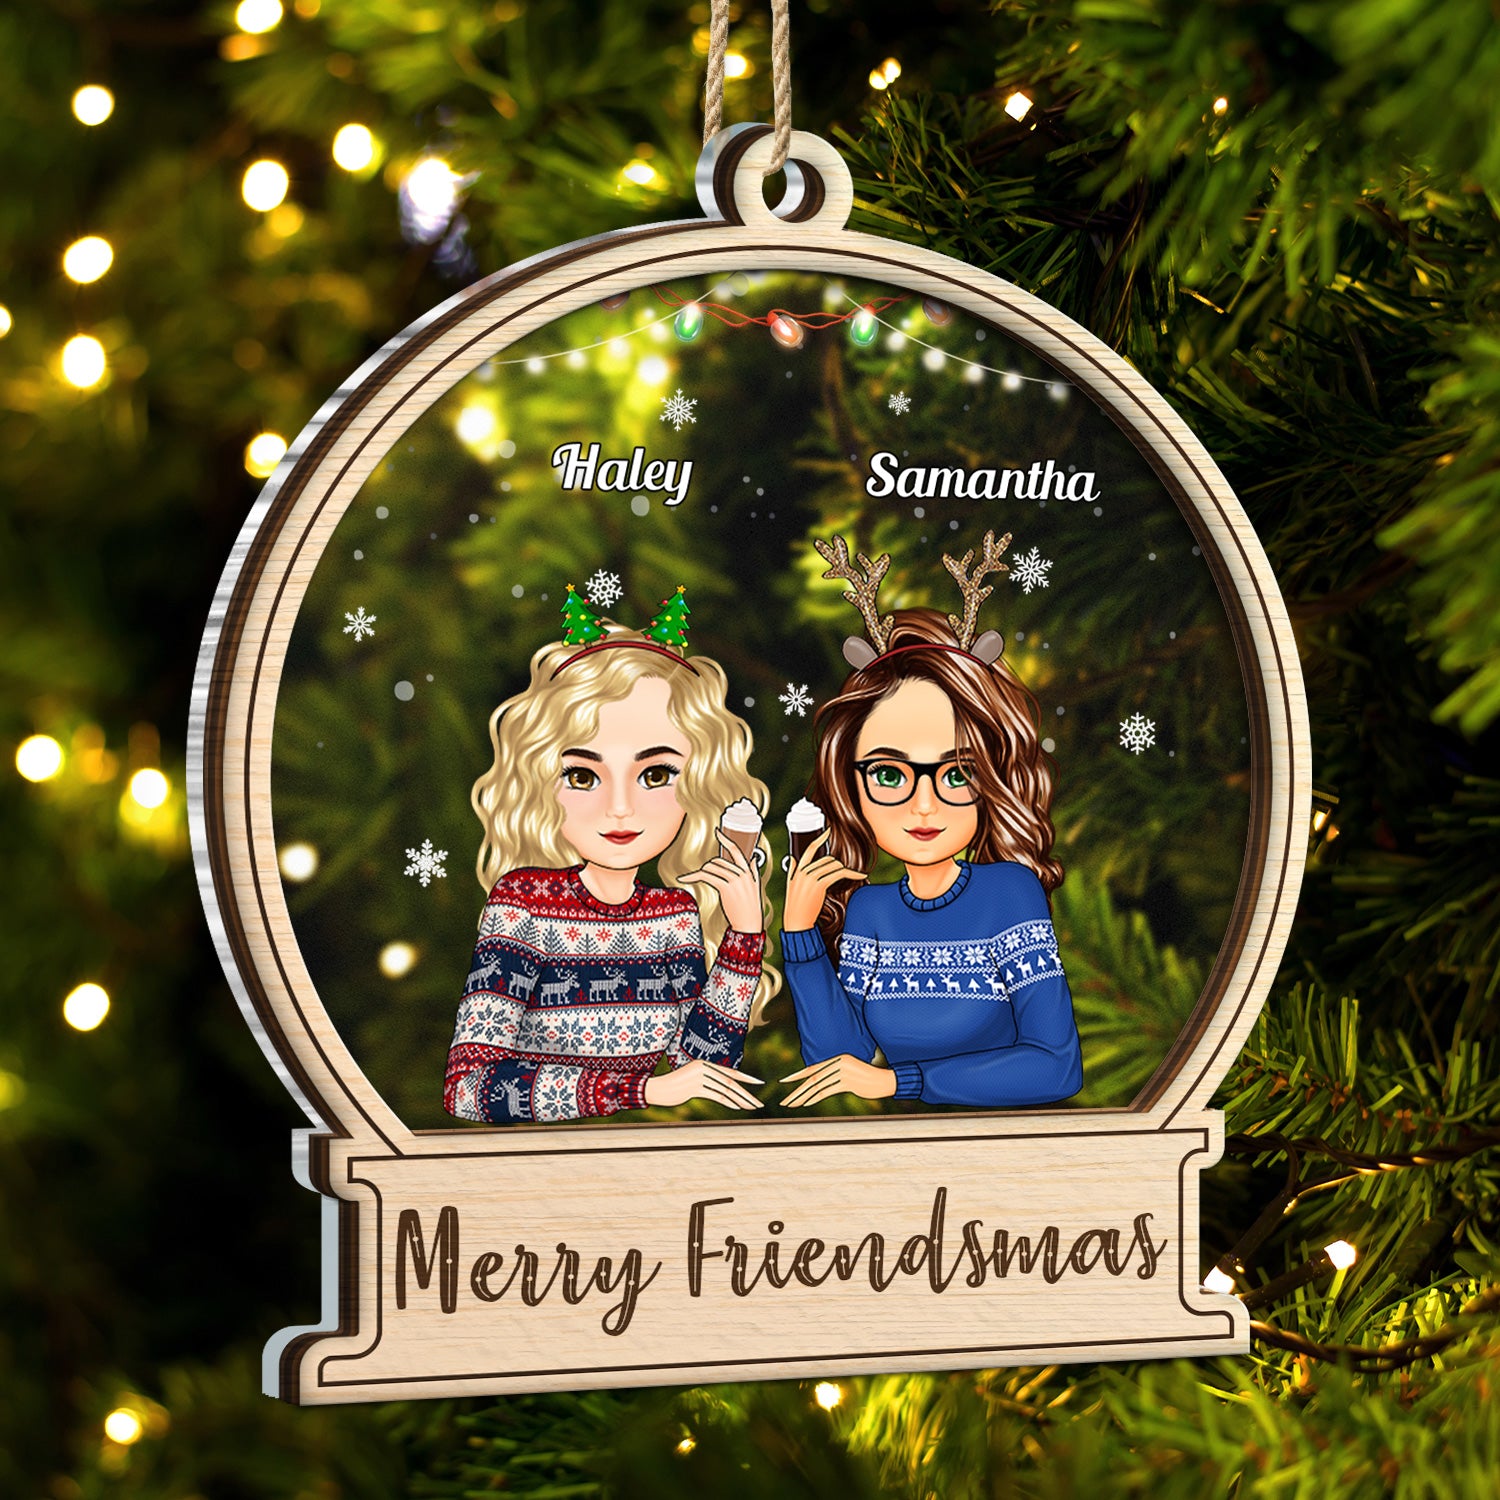 Merry Friendsmas - Christmas Gift For Besties - Personalized 2-Layered Mix Ornament